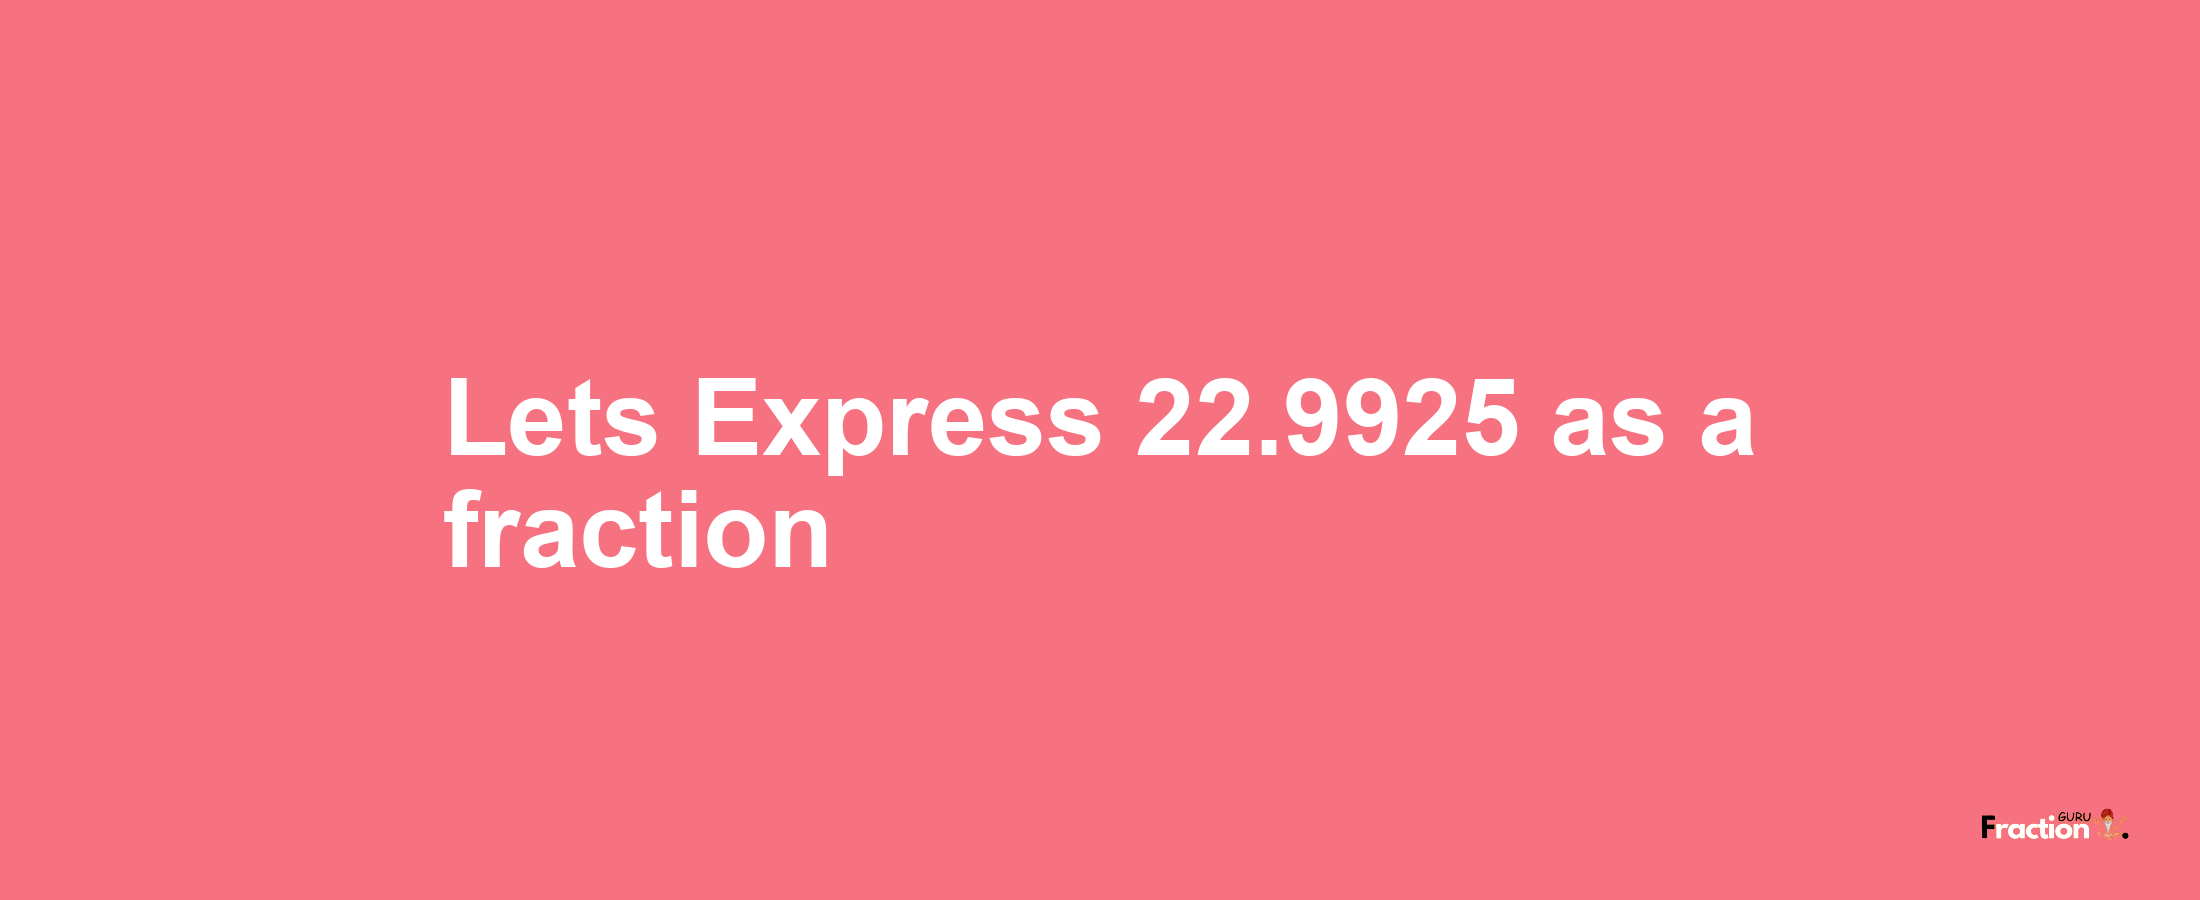 Lets Express 22.9925 as afraction